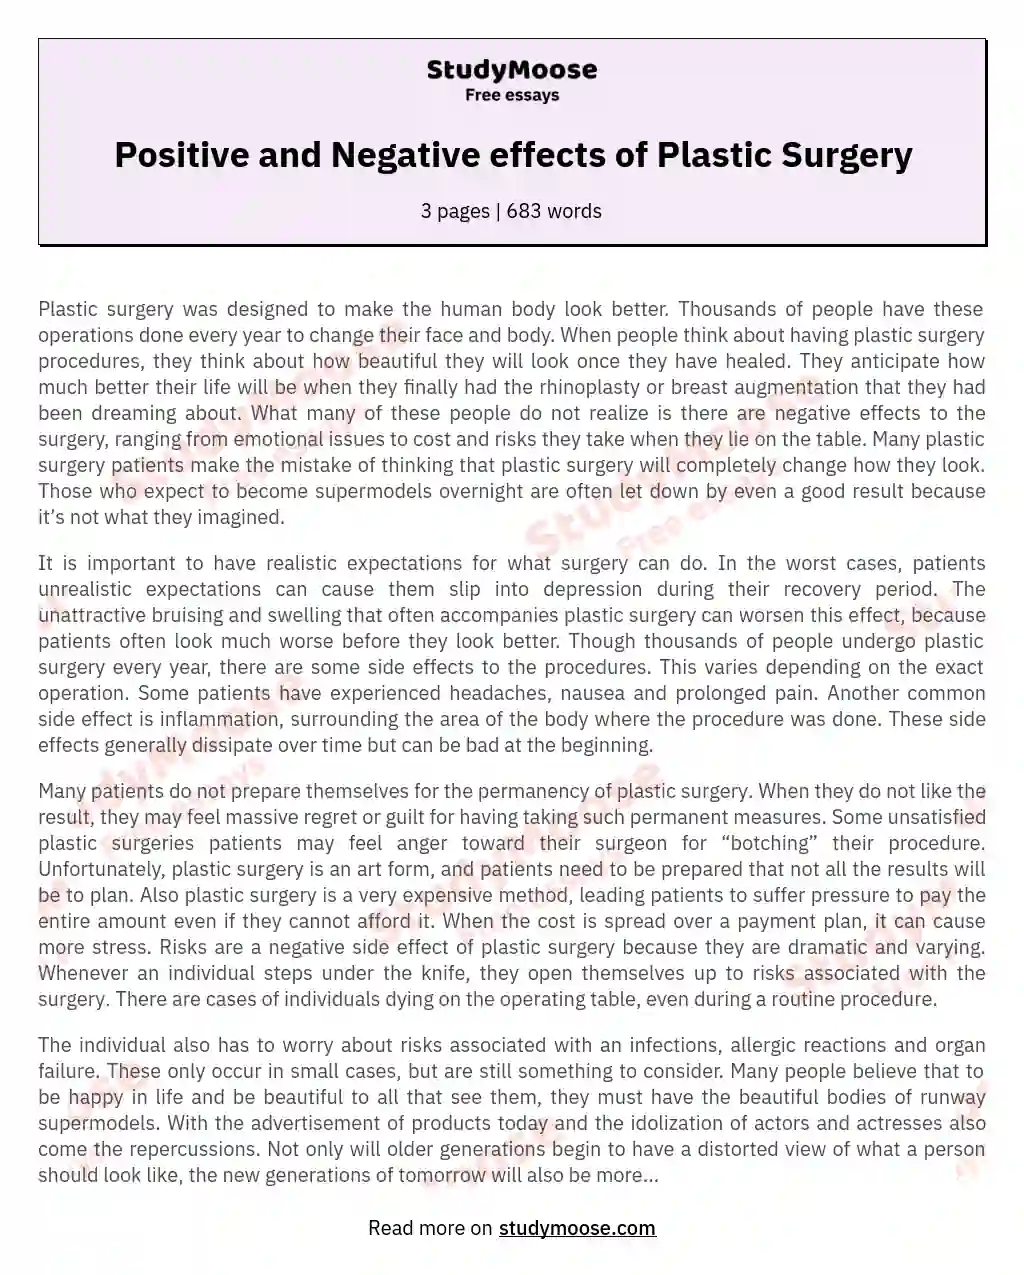 Positive and Negative effects of Plastic Surgery essay